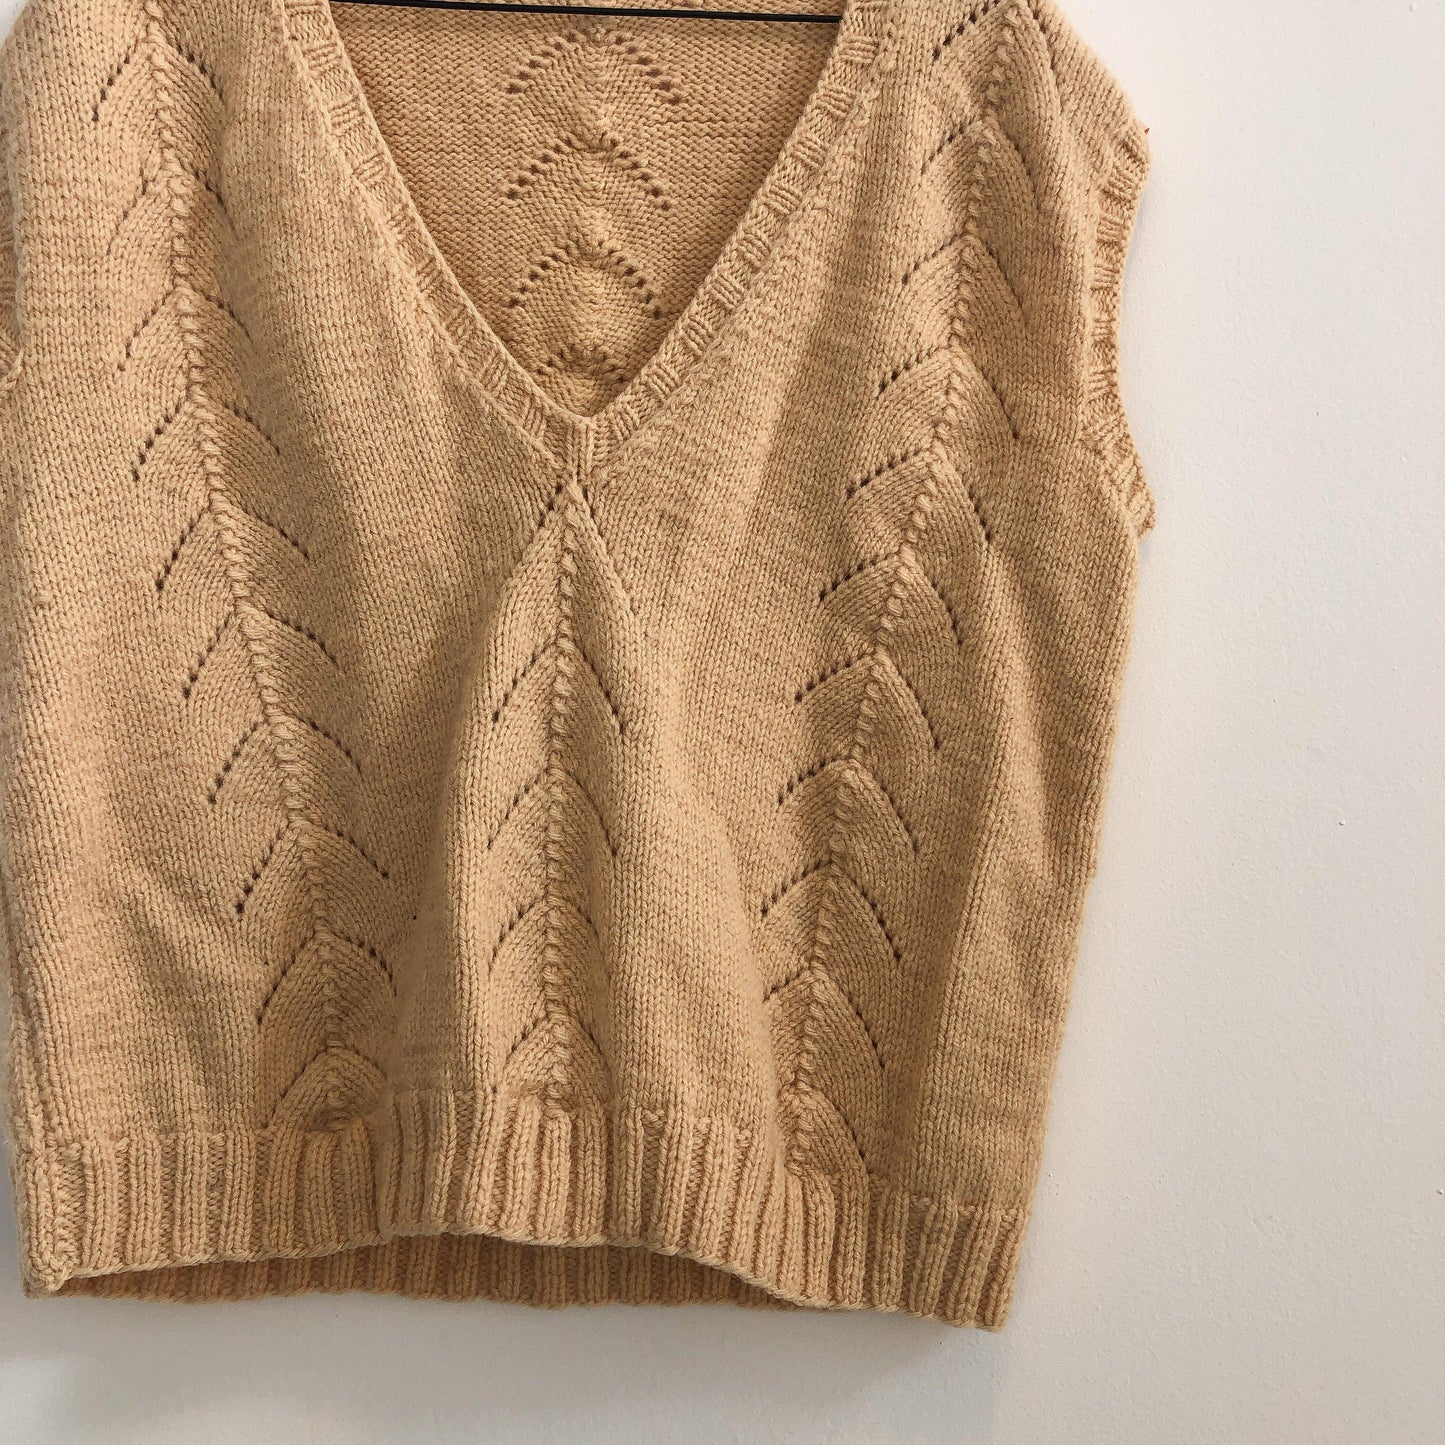 Arch Knit Sweater Vest - Upcycled Aviary